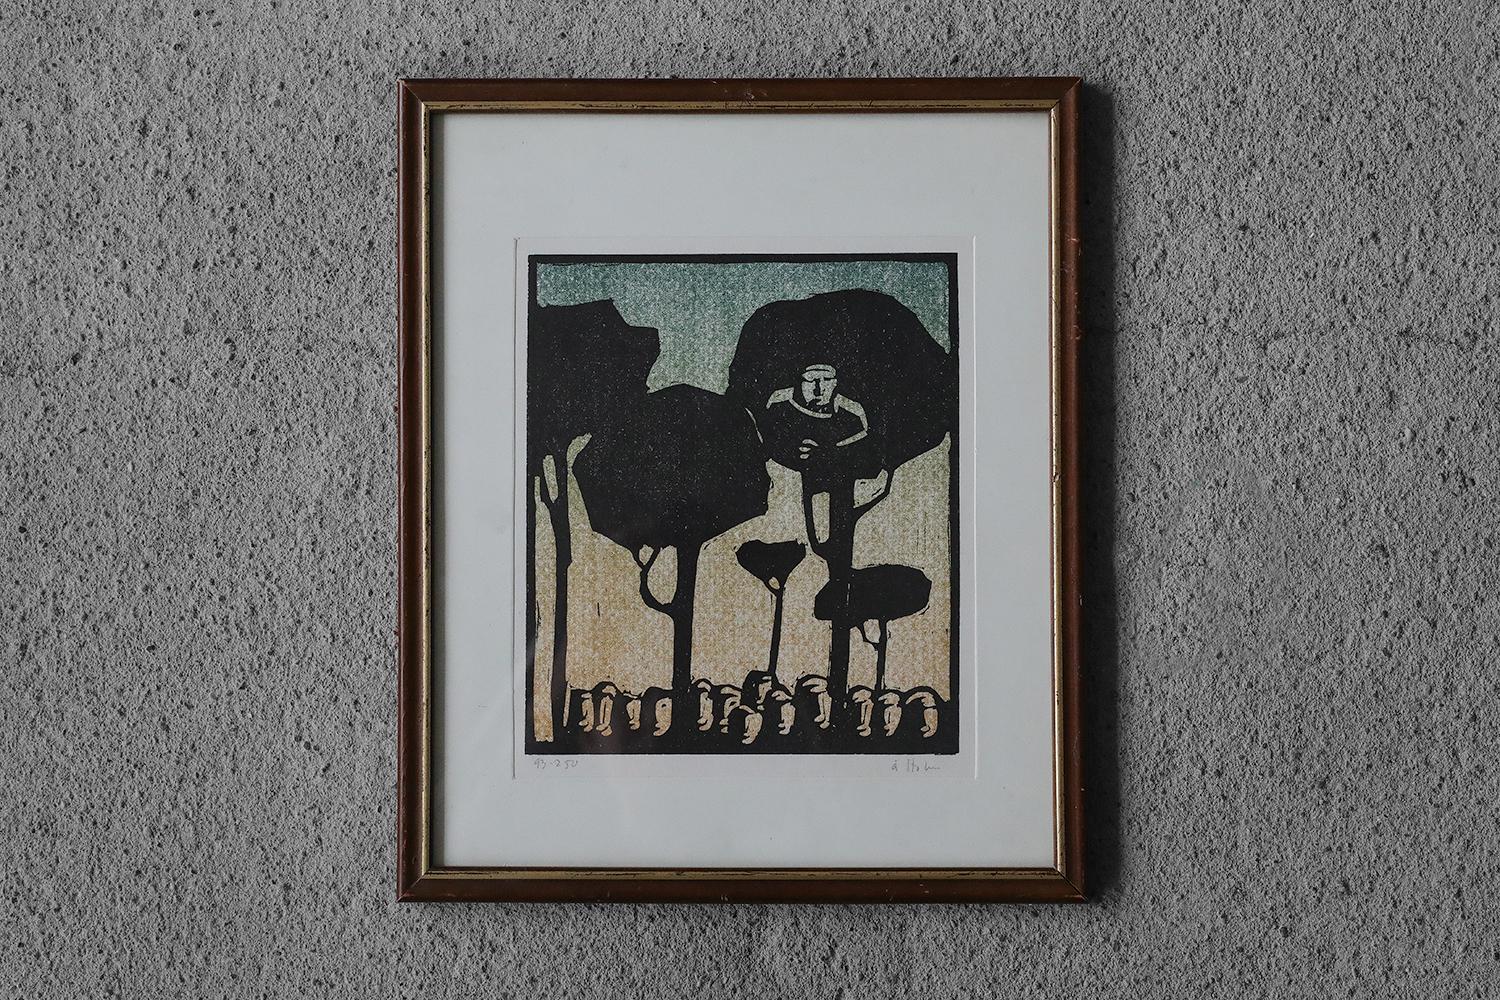 Åke Holm, Biblical motif, 1970s
Linocut
Number 93/250
The work is signed by the artist and individually numbered (pencil)
Work dimensions 32/27
The work is framed

Åke Holm (1900-1980) was an artist and ceramicist living in Hoganas, Sweden. In his